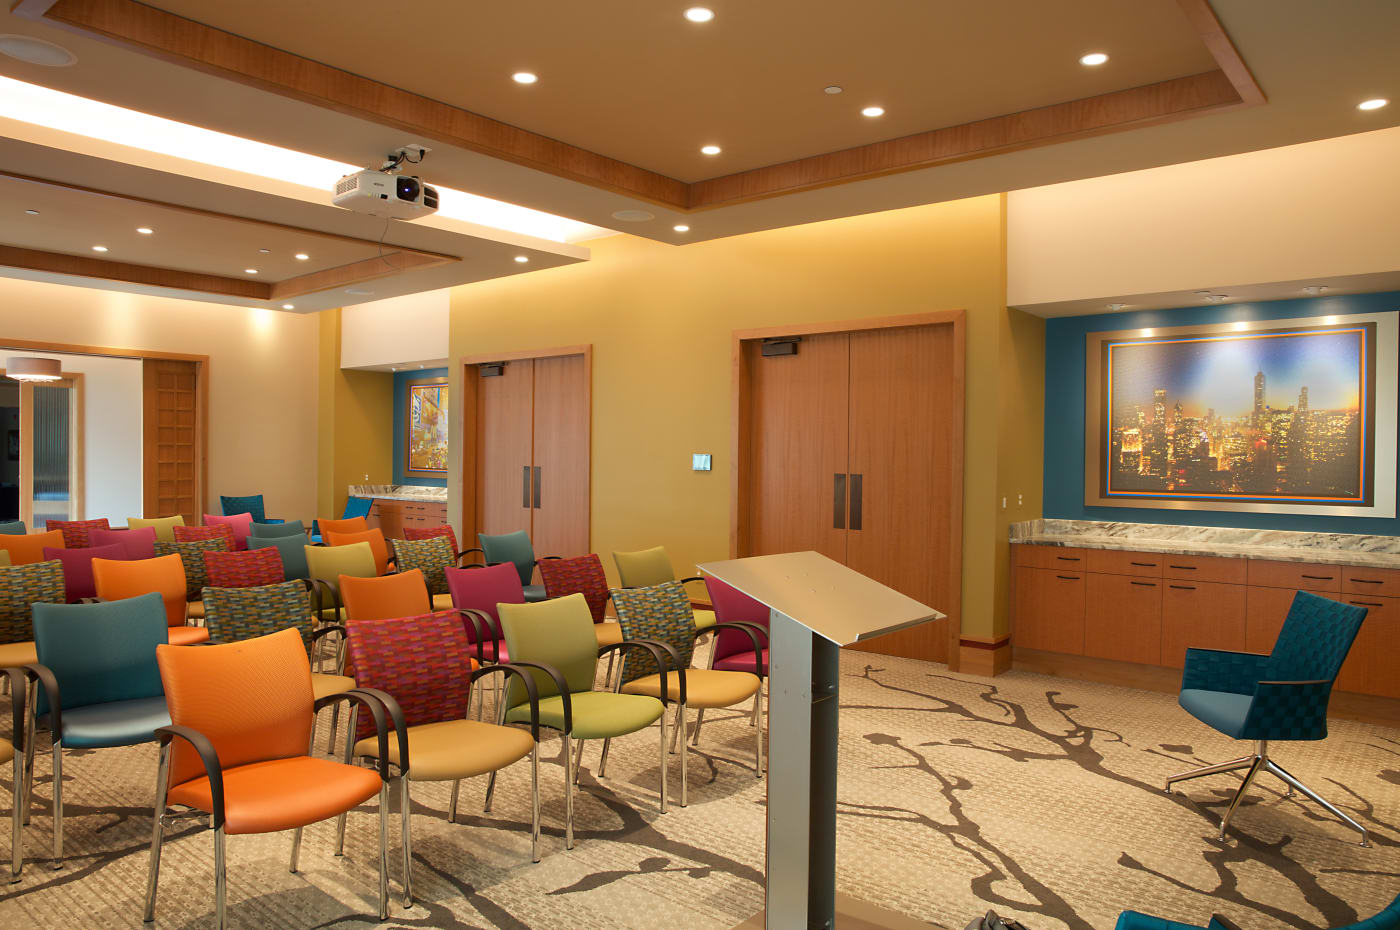 Multi-purpose room is host to many special events at All Seasons Birmingham in Birmingham, Michigan